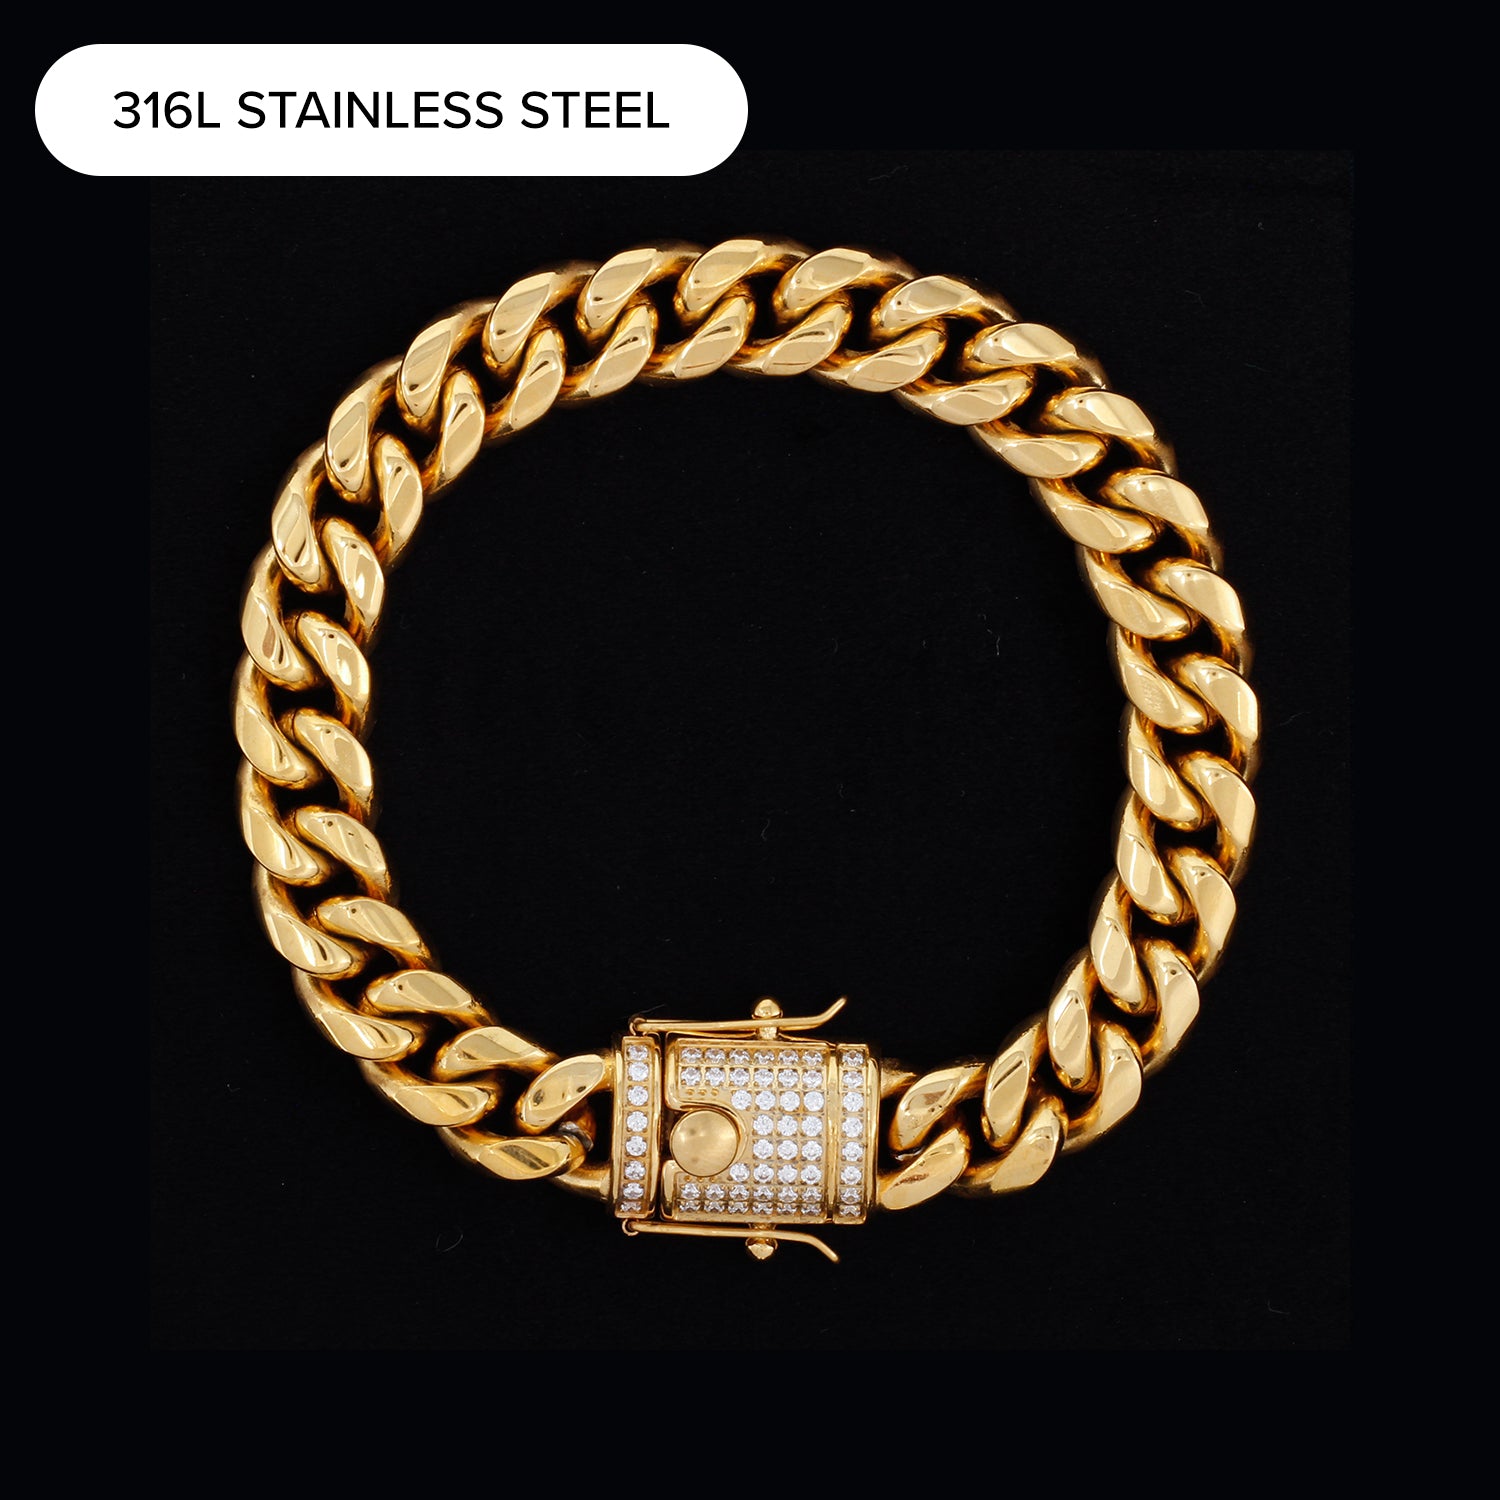 12MM MIAMI CUBAN BRACELET WITH ICED OUT LOCK